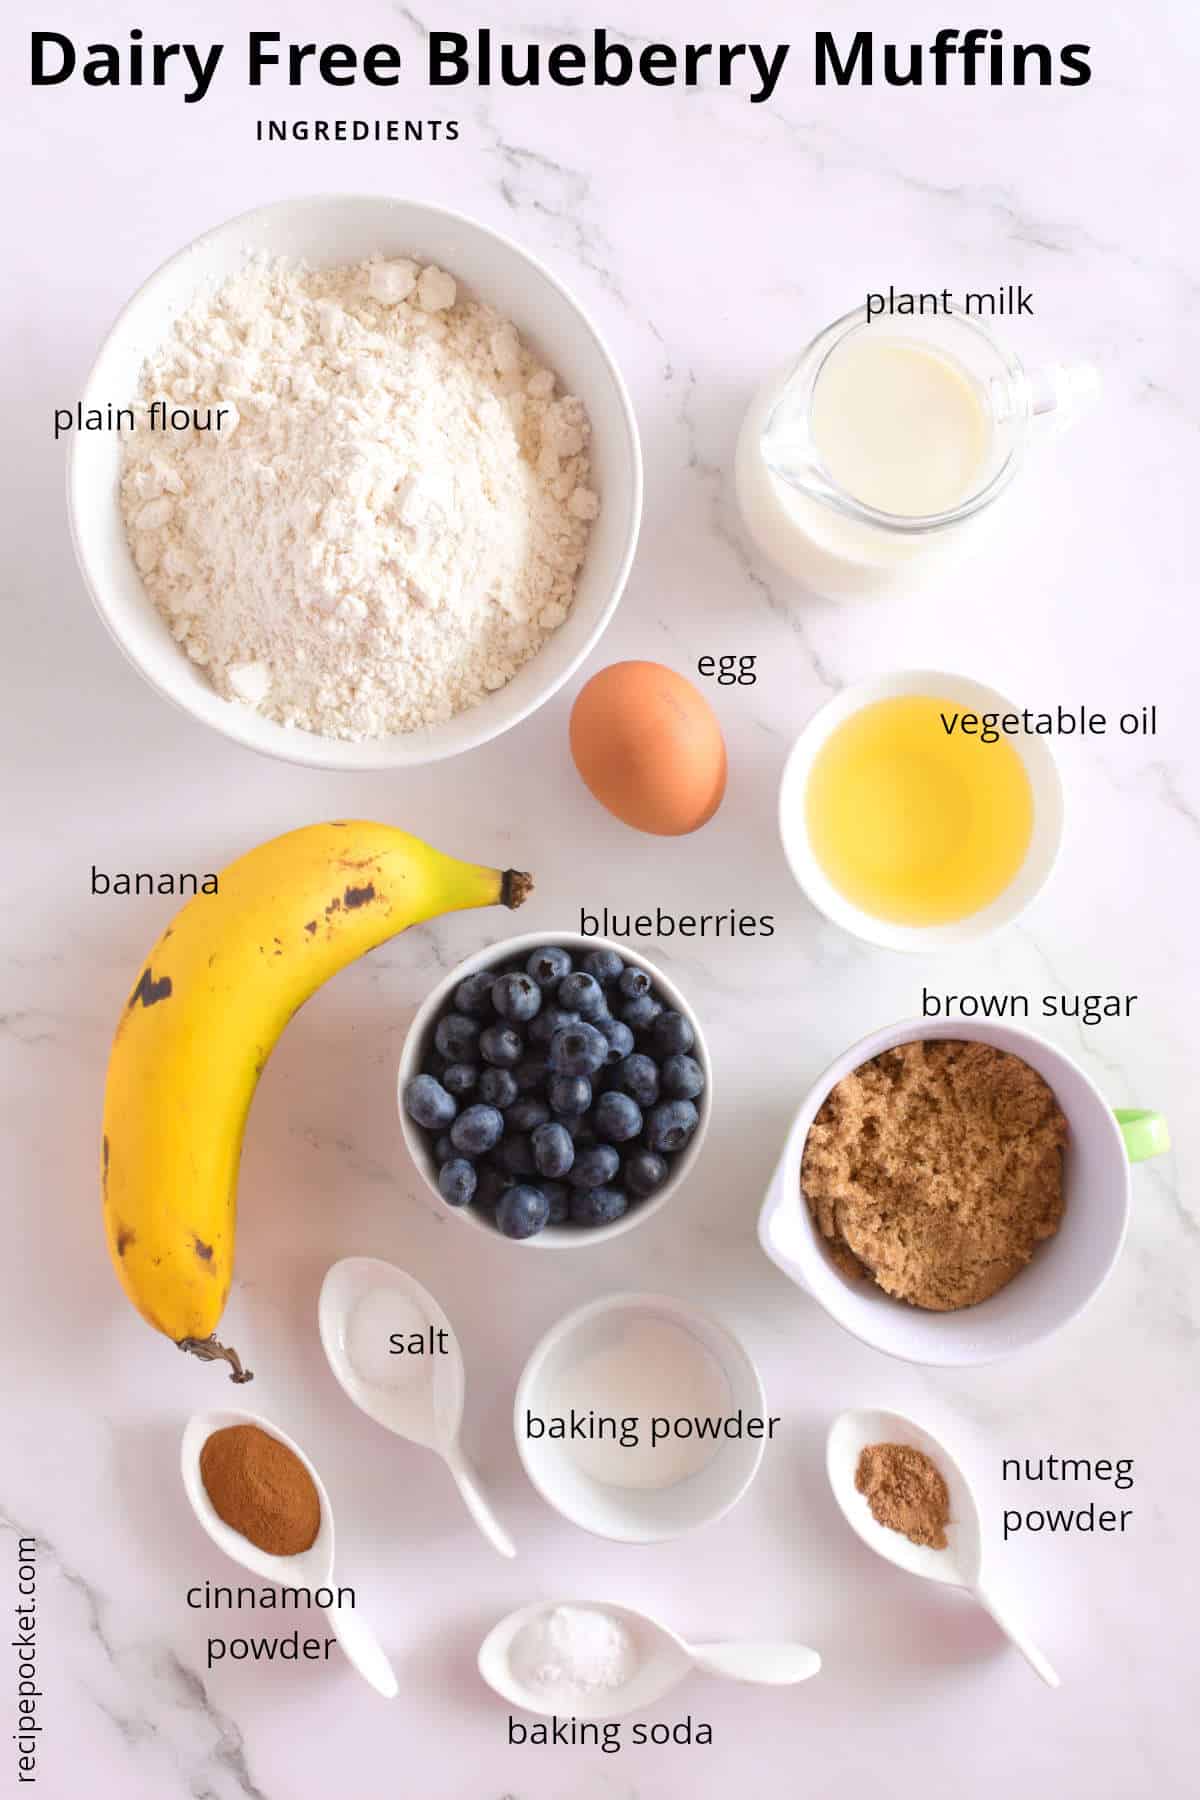 Ingredient image for dairy free blueberry muffins.